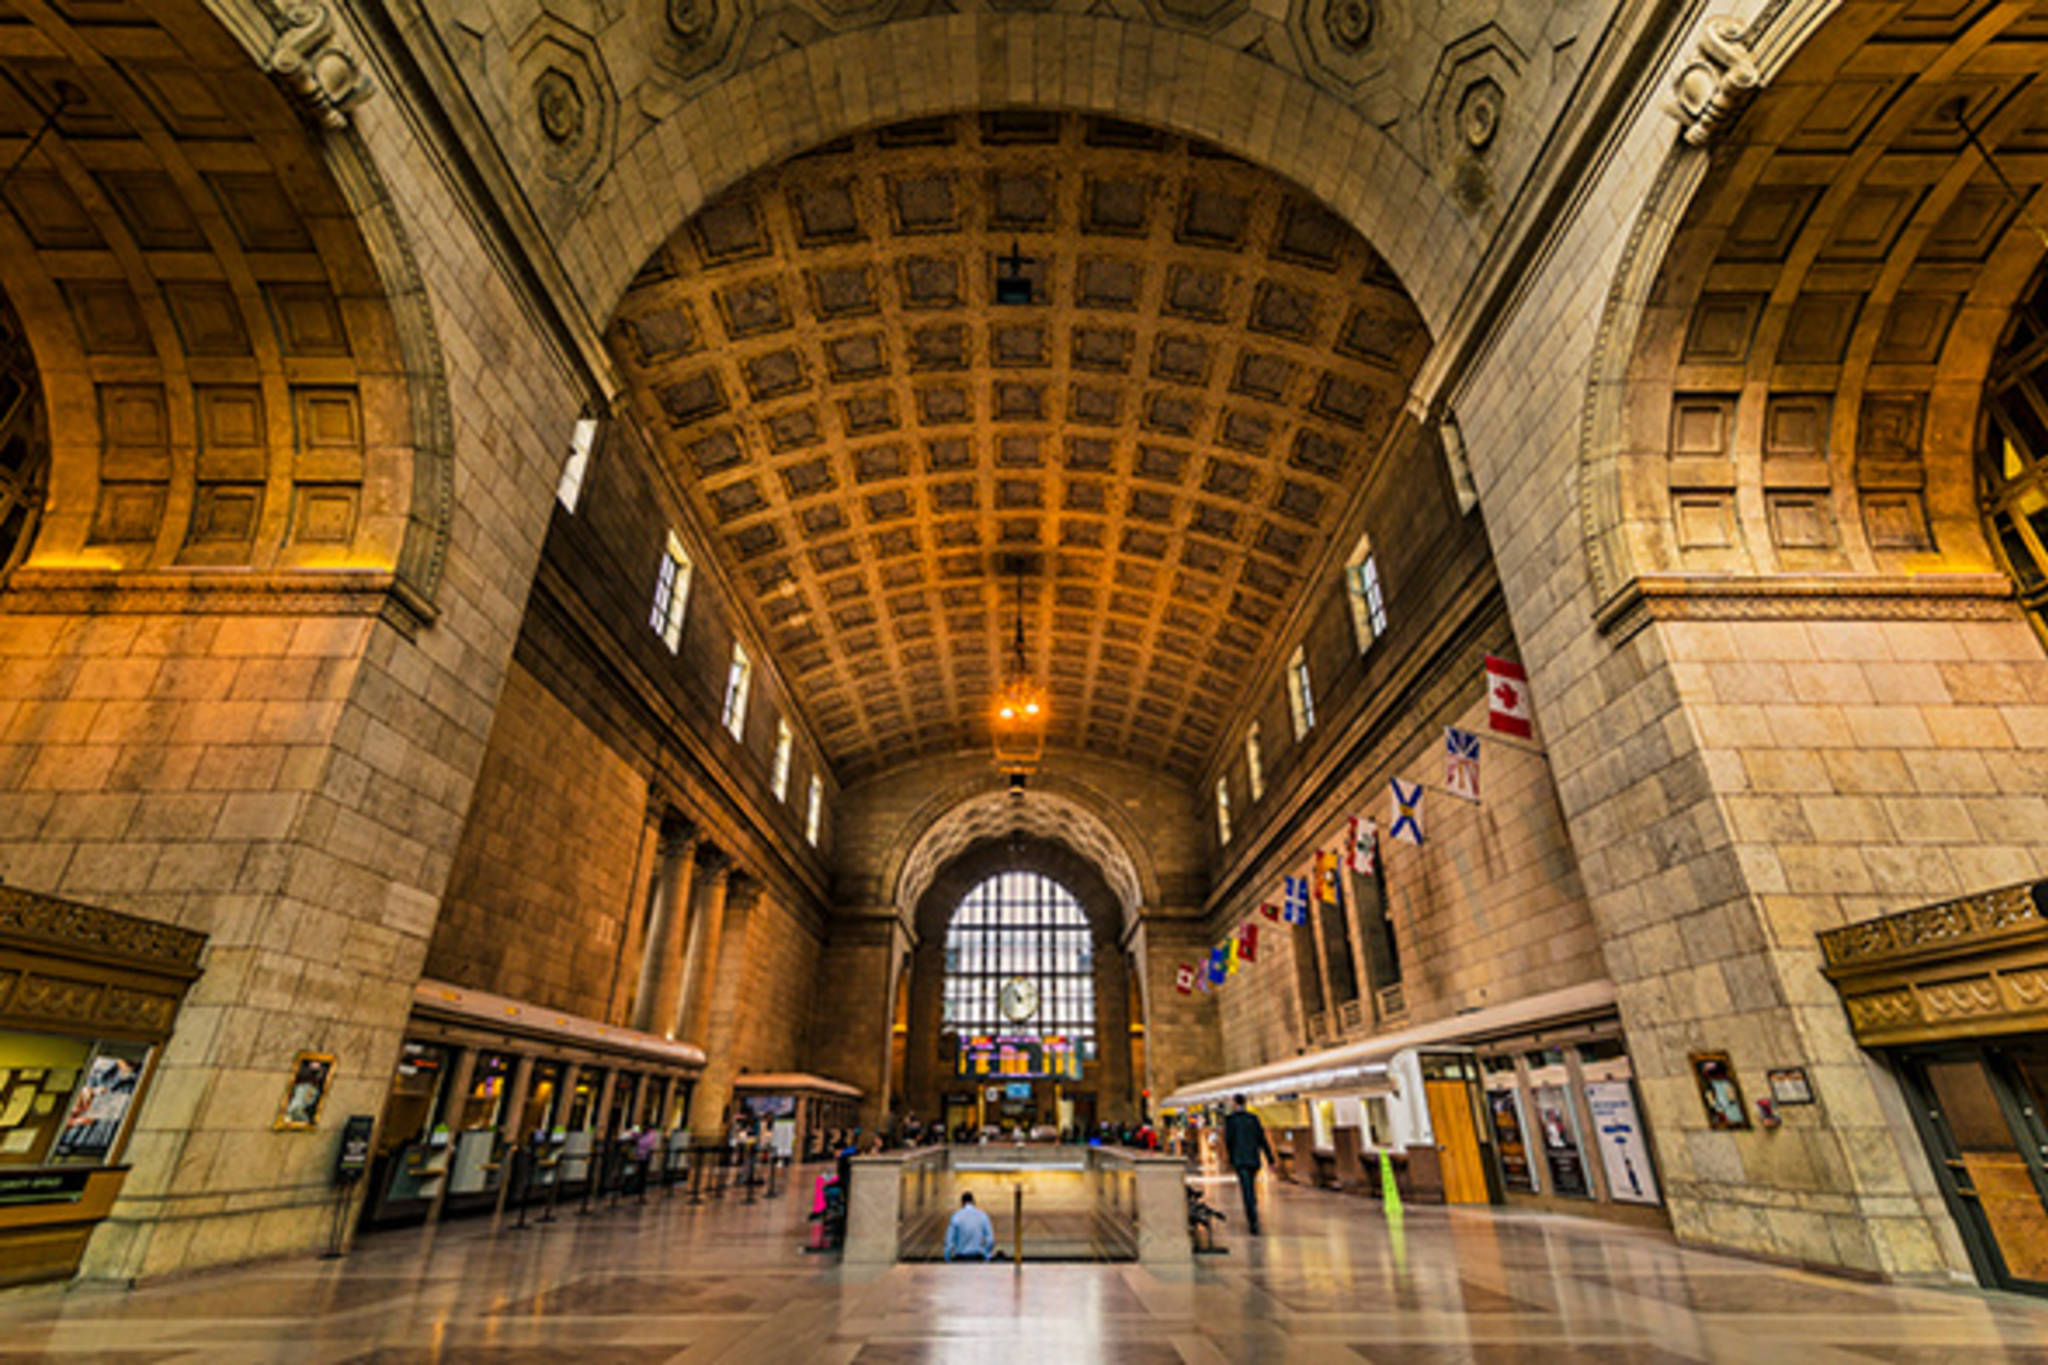 Holiday pop-up market to take over Union Station